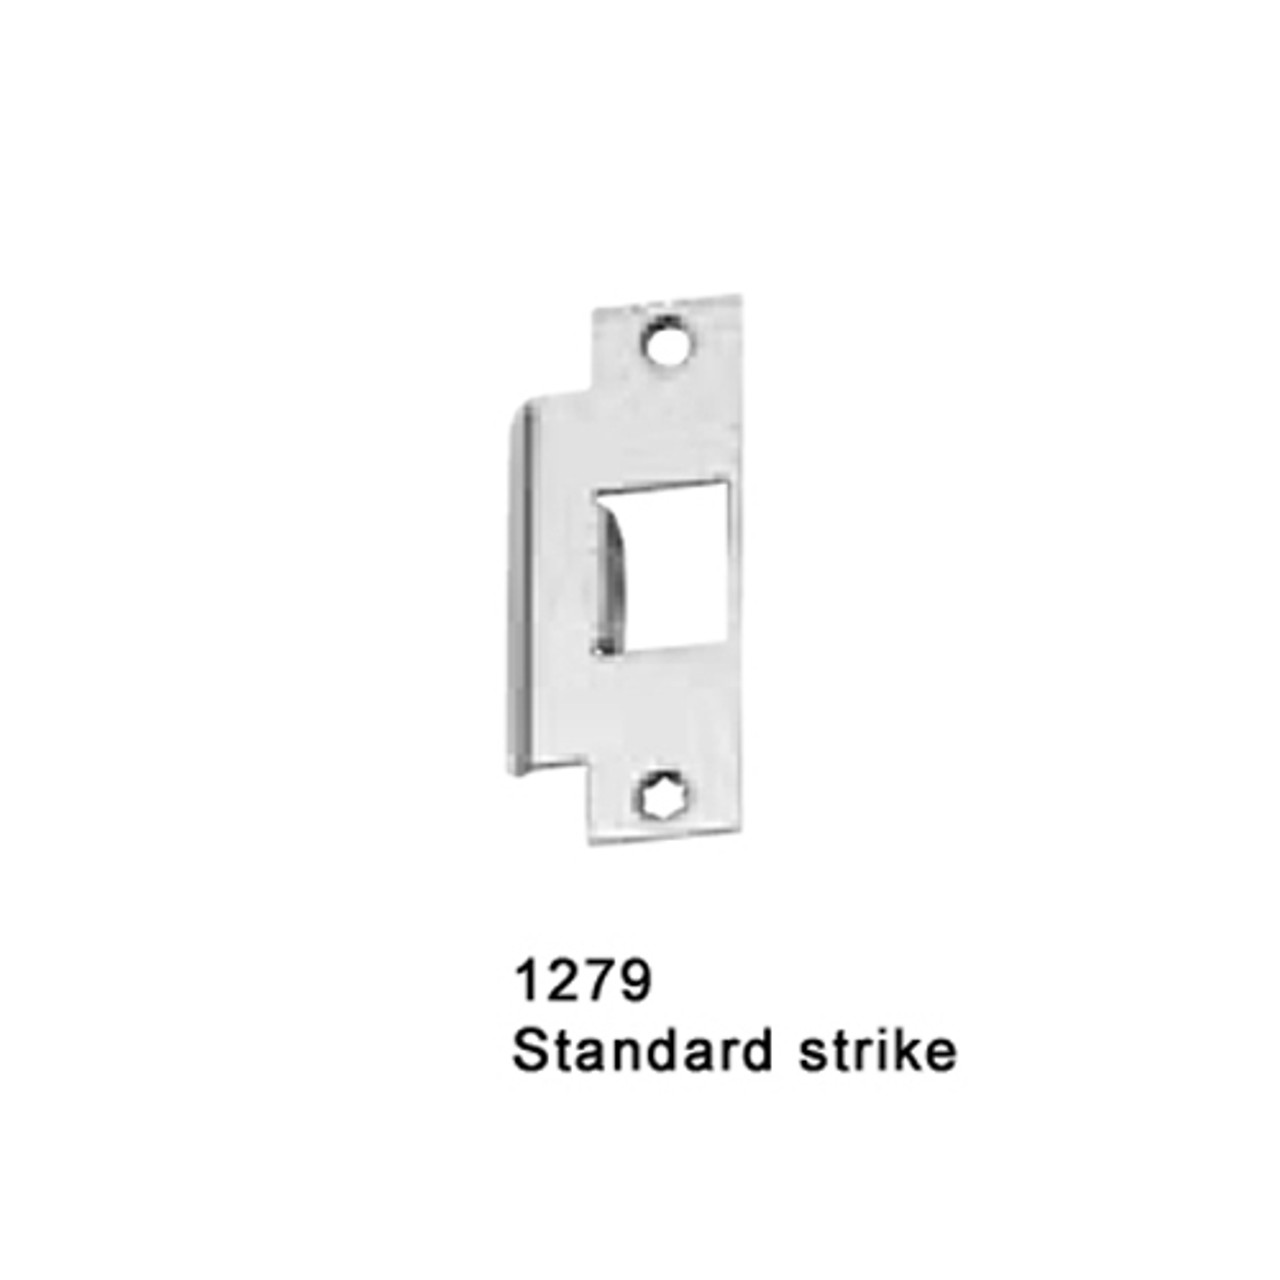 CD25-M-L-NL-DANE-US32-4-LHR Falcon 25 Series Mortise Lock Devices 510L-NL Dane Lever Trim with Night Latch in Polished Stainless Steel